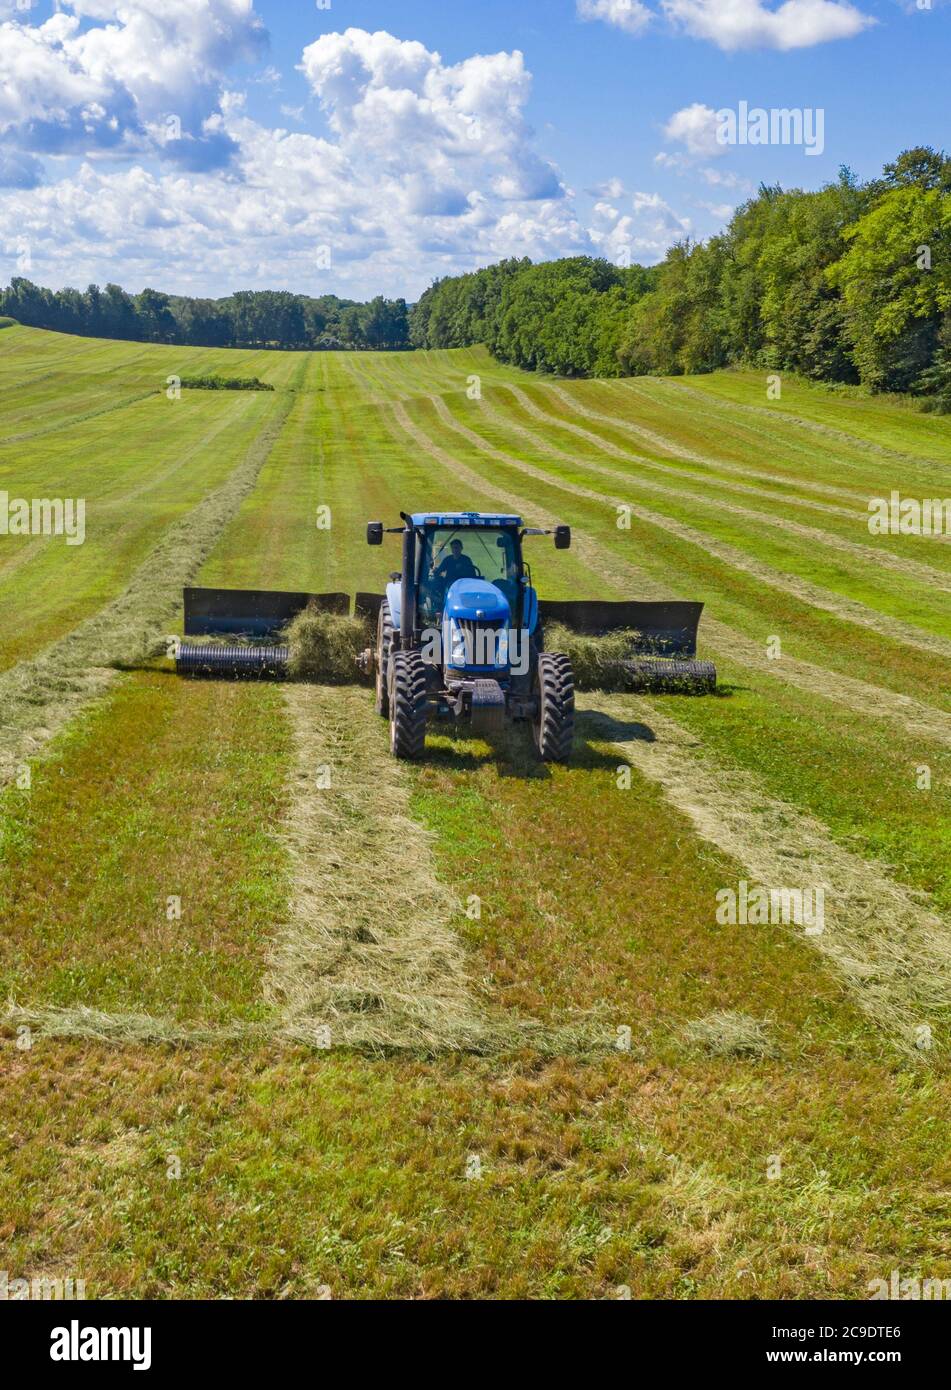 Hopkins, Michigan - A tractor pulls a hay rake through a field, piling the hay into windrows. Stock Photo